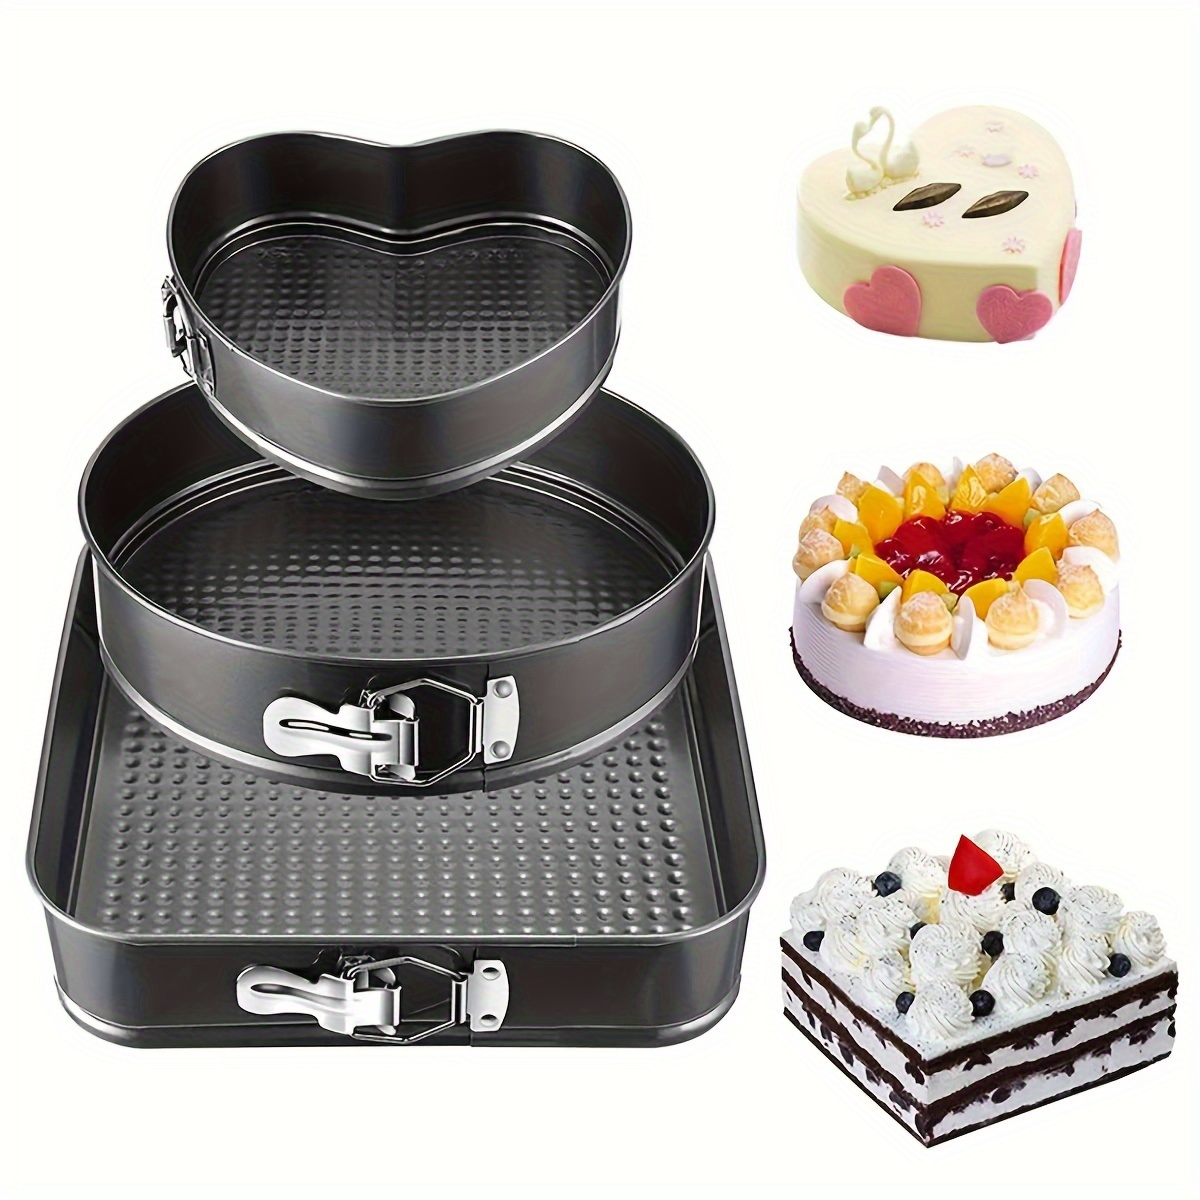 

3 Piece (7, 8, 9 Inch) Heart-shaped Round Square Baking Pan Non-stick Cheesecake Pan With Removable Bottom Stainless Steel Baking Pan For Cakes, Mousse, Etc